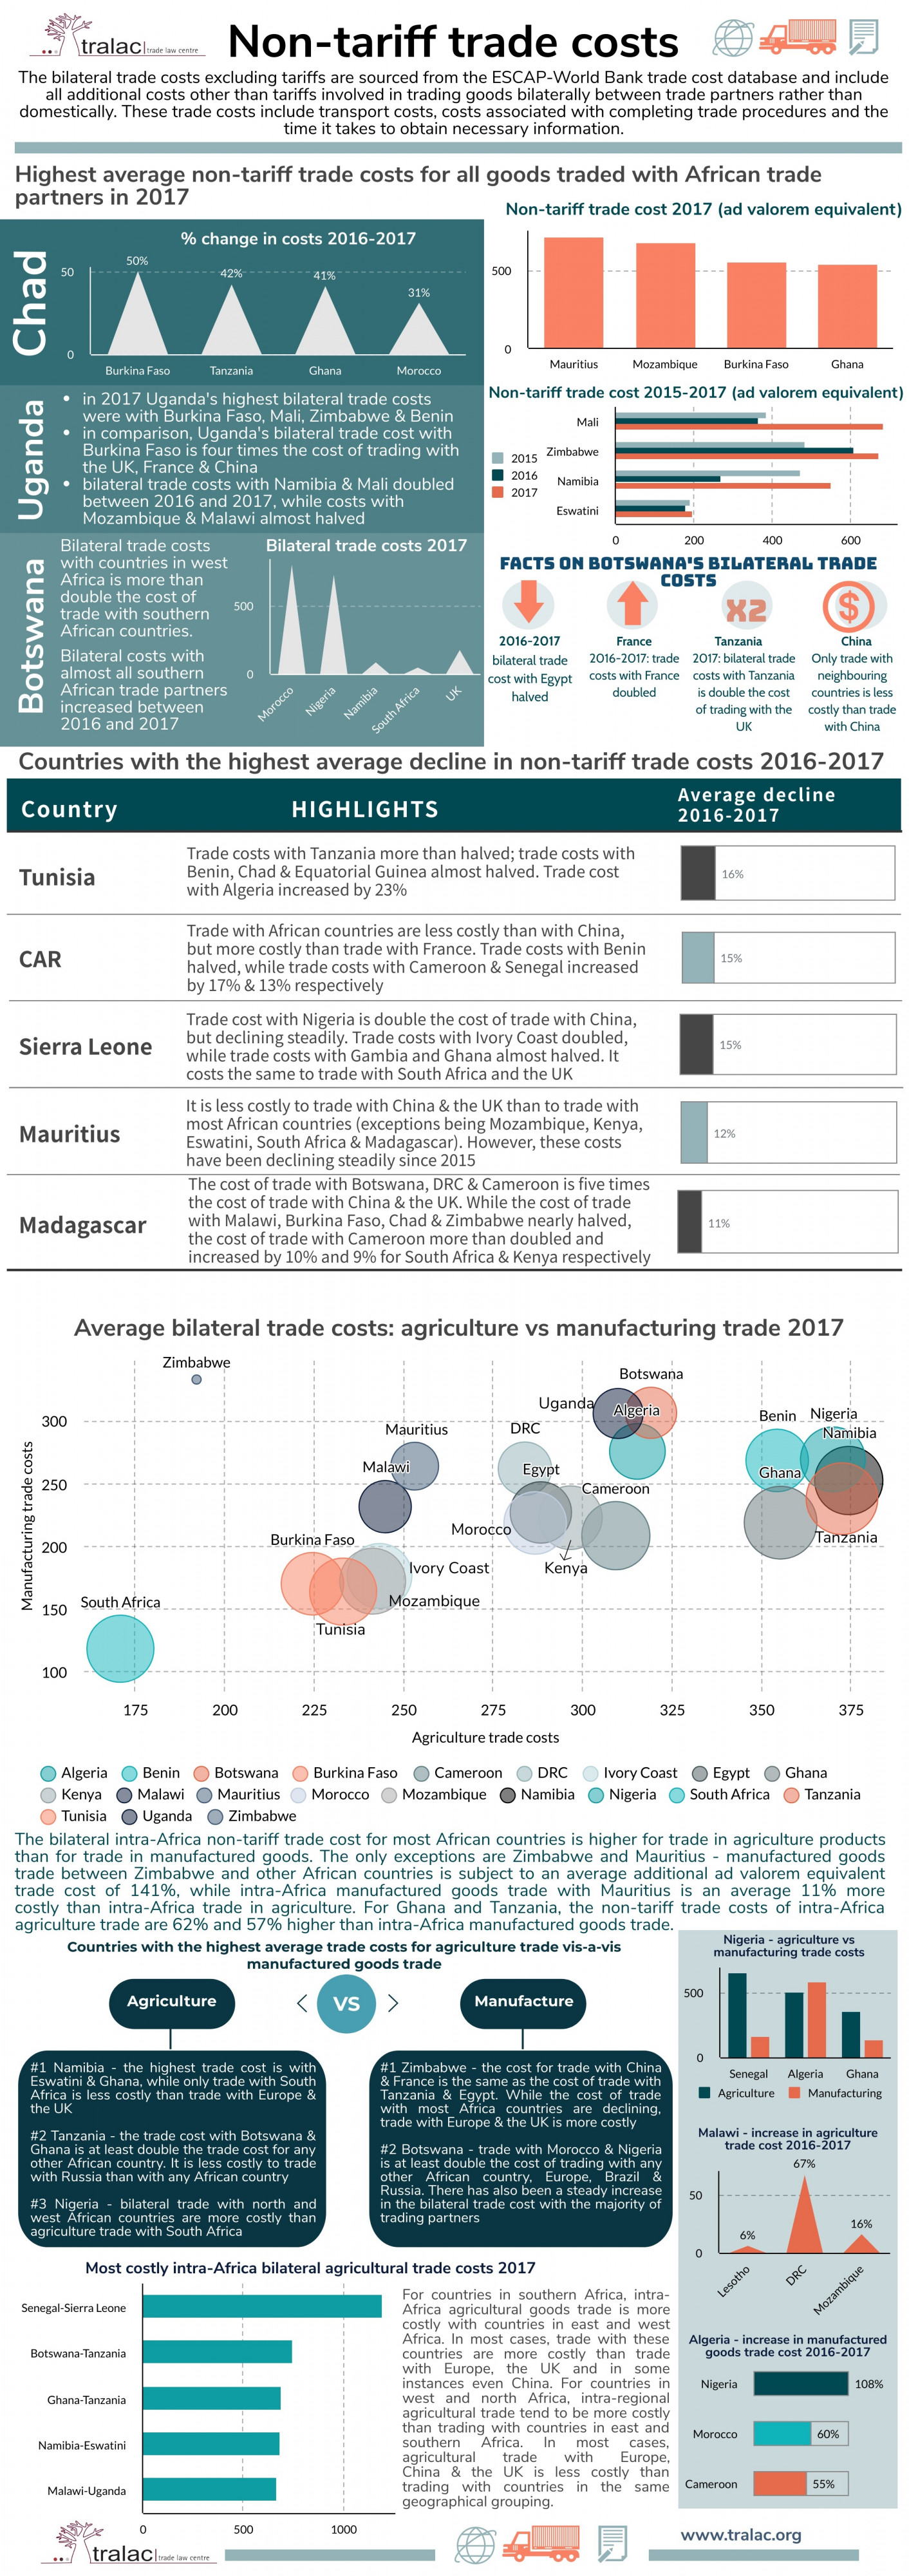 Intra-Africa trade: Non-tariff trade costs